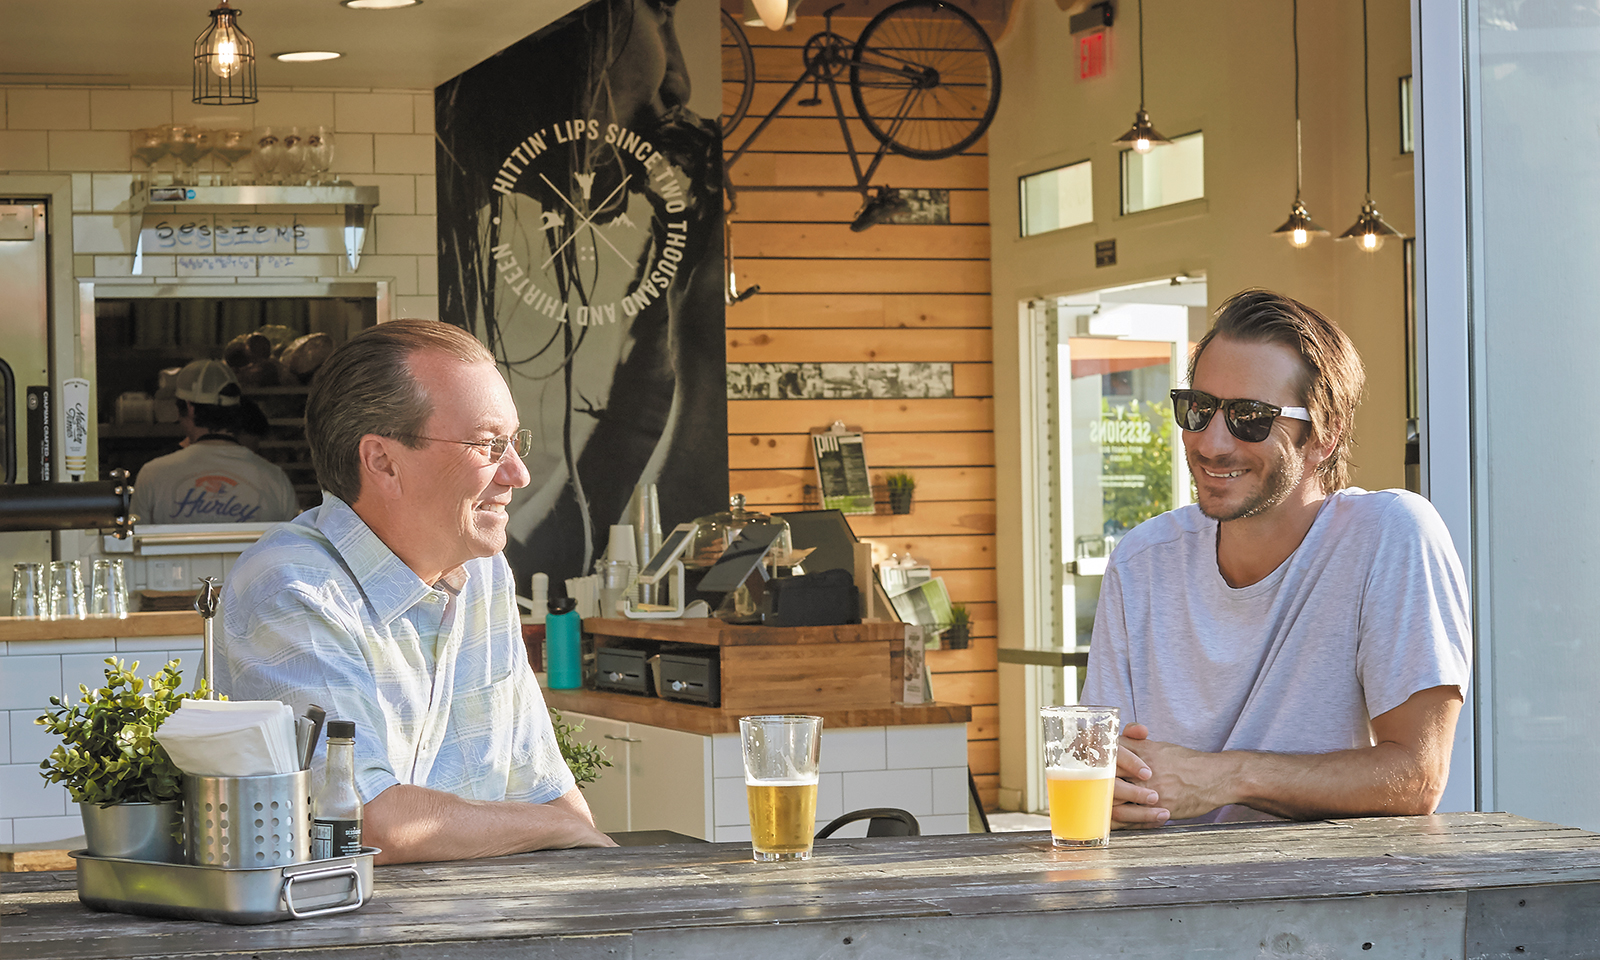 Sessions co-founder brings scratch kitchen, craft beer to Woodbridge